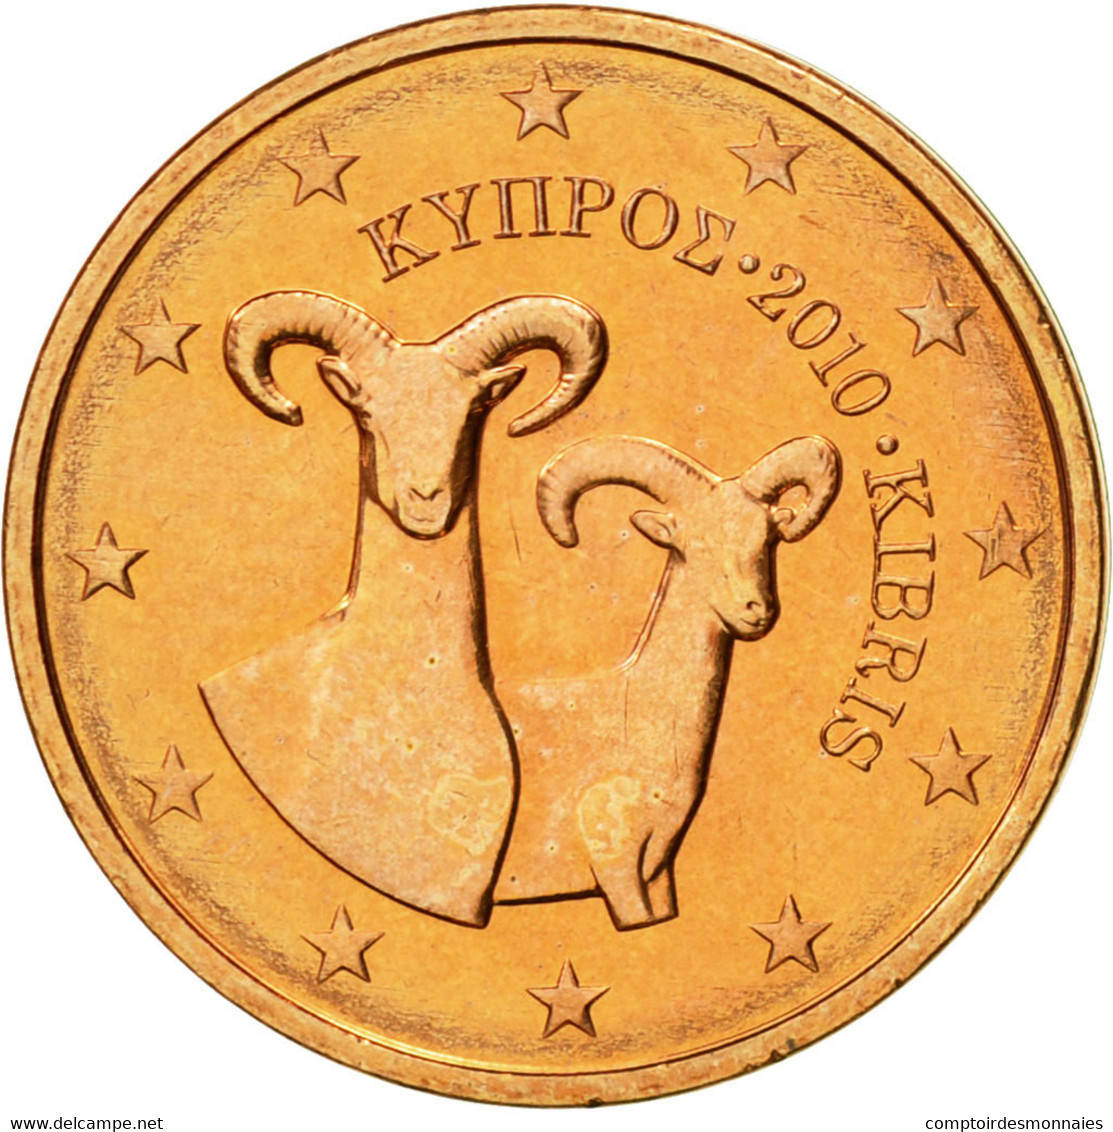 Chypre, 2 Euro Cent, 2010, FDC, Copper Plated Steel, KM:79 - Chypre